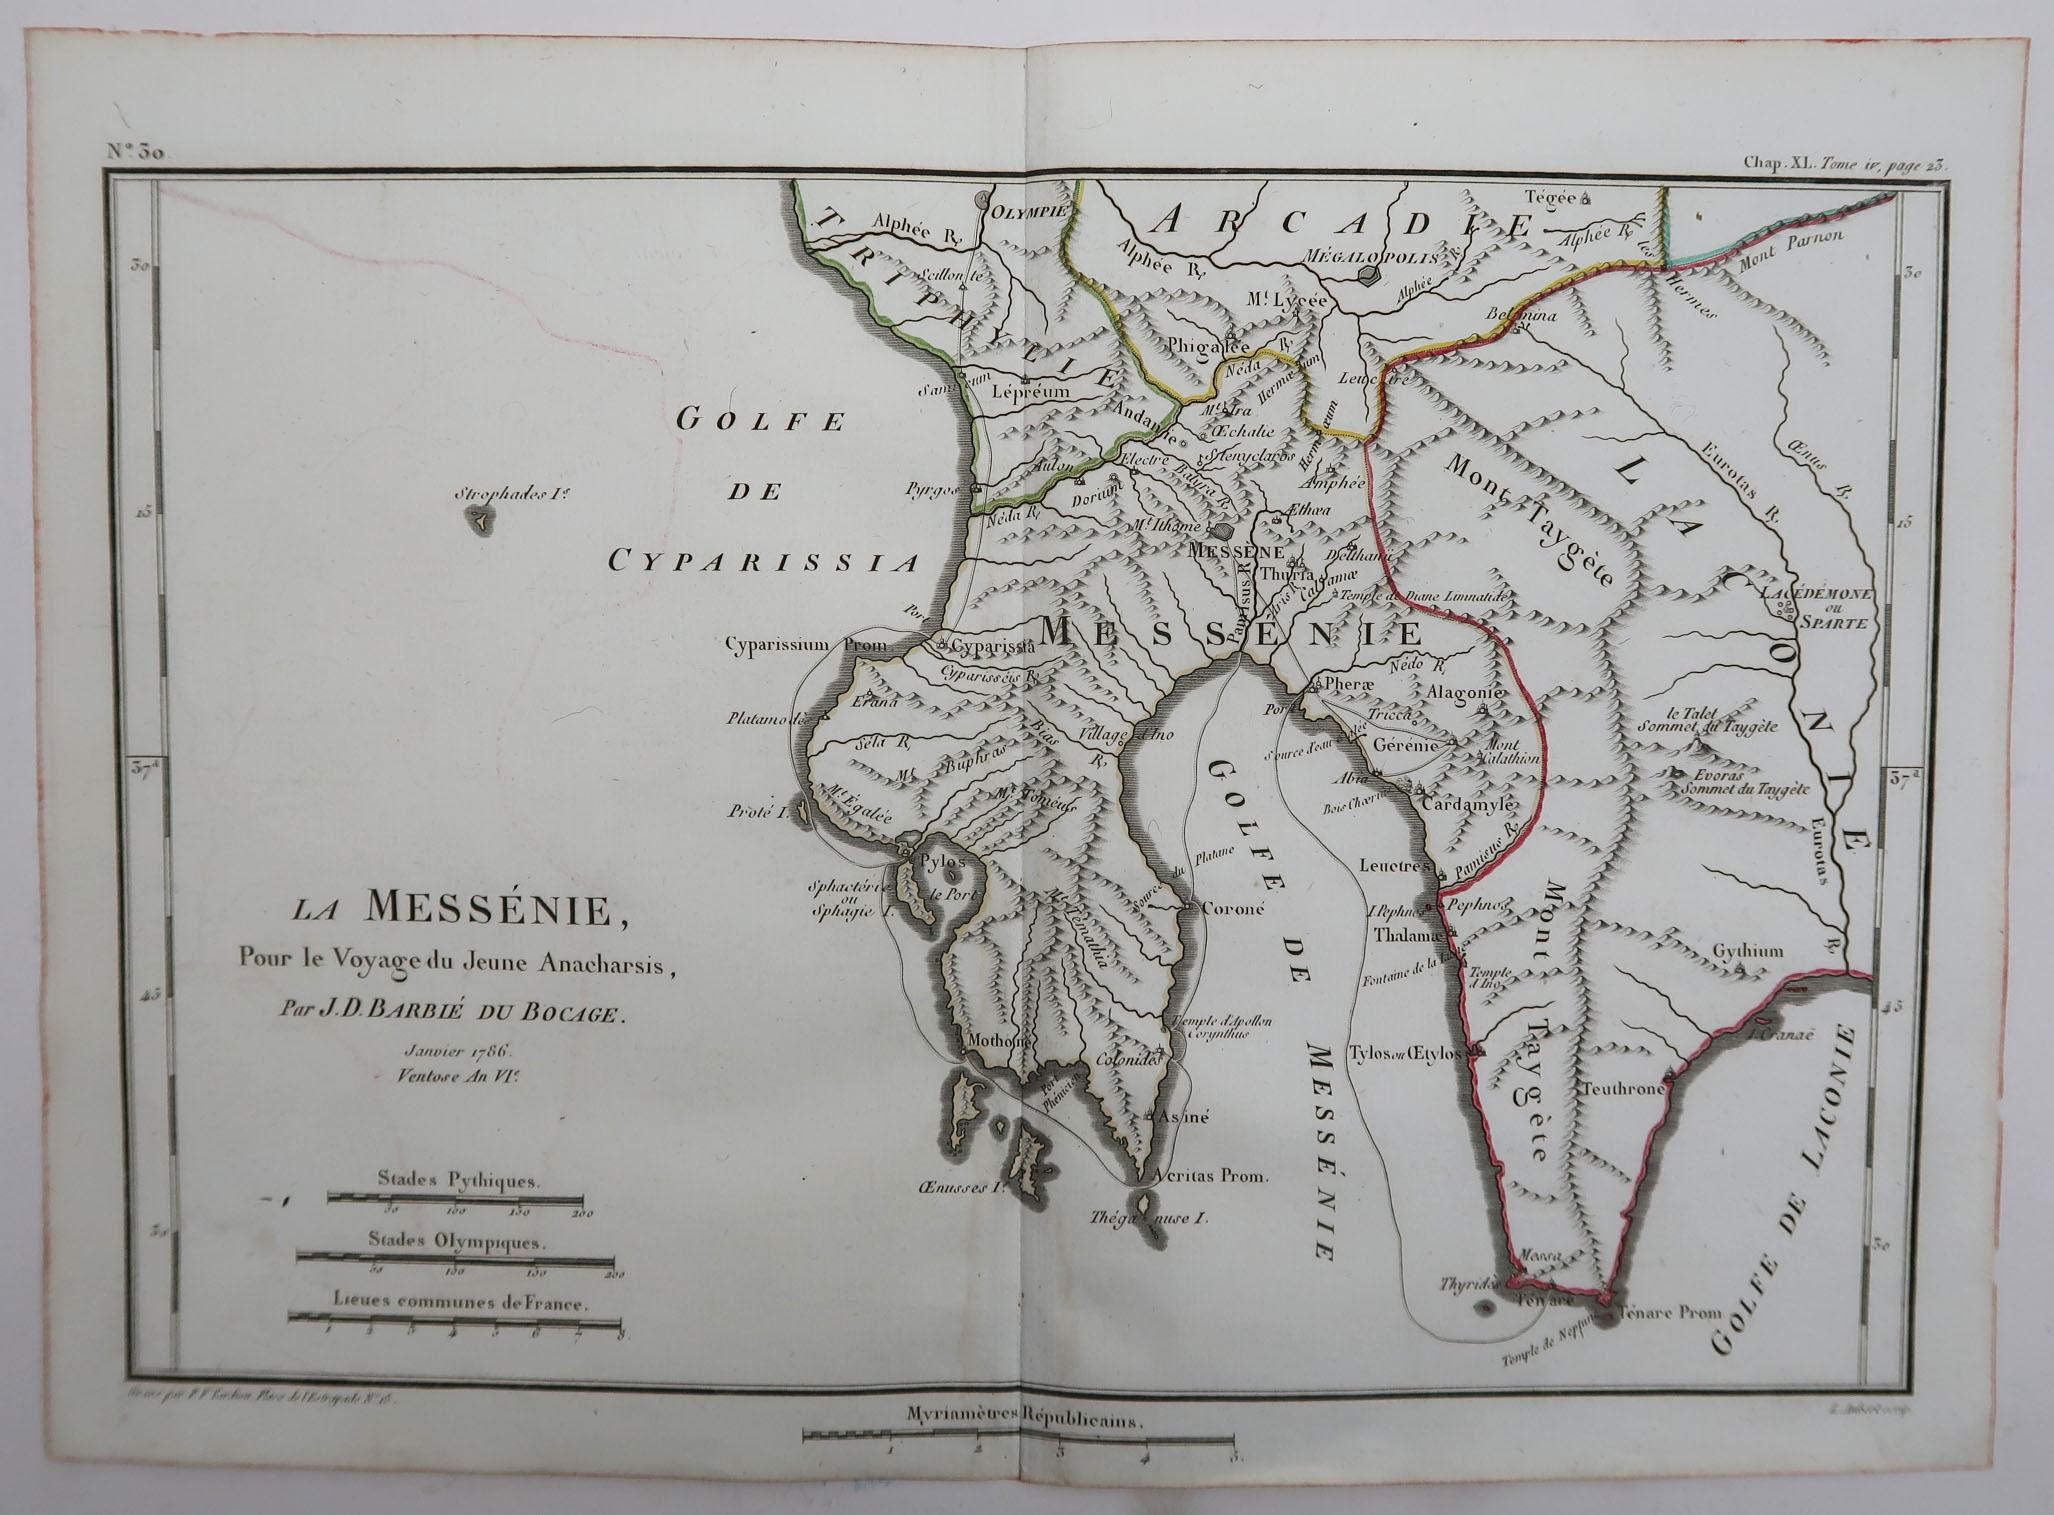 Other Original Antique Map of Ancient Greece, Messenia, 1786